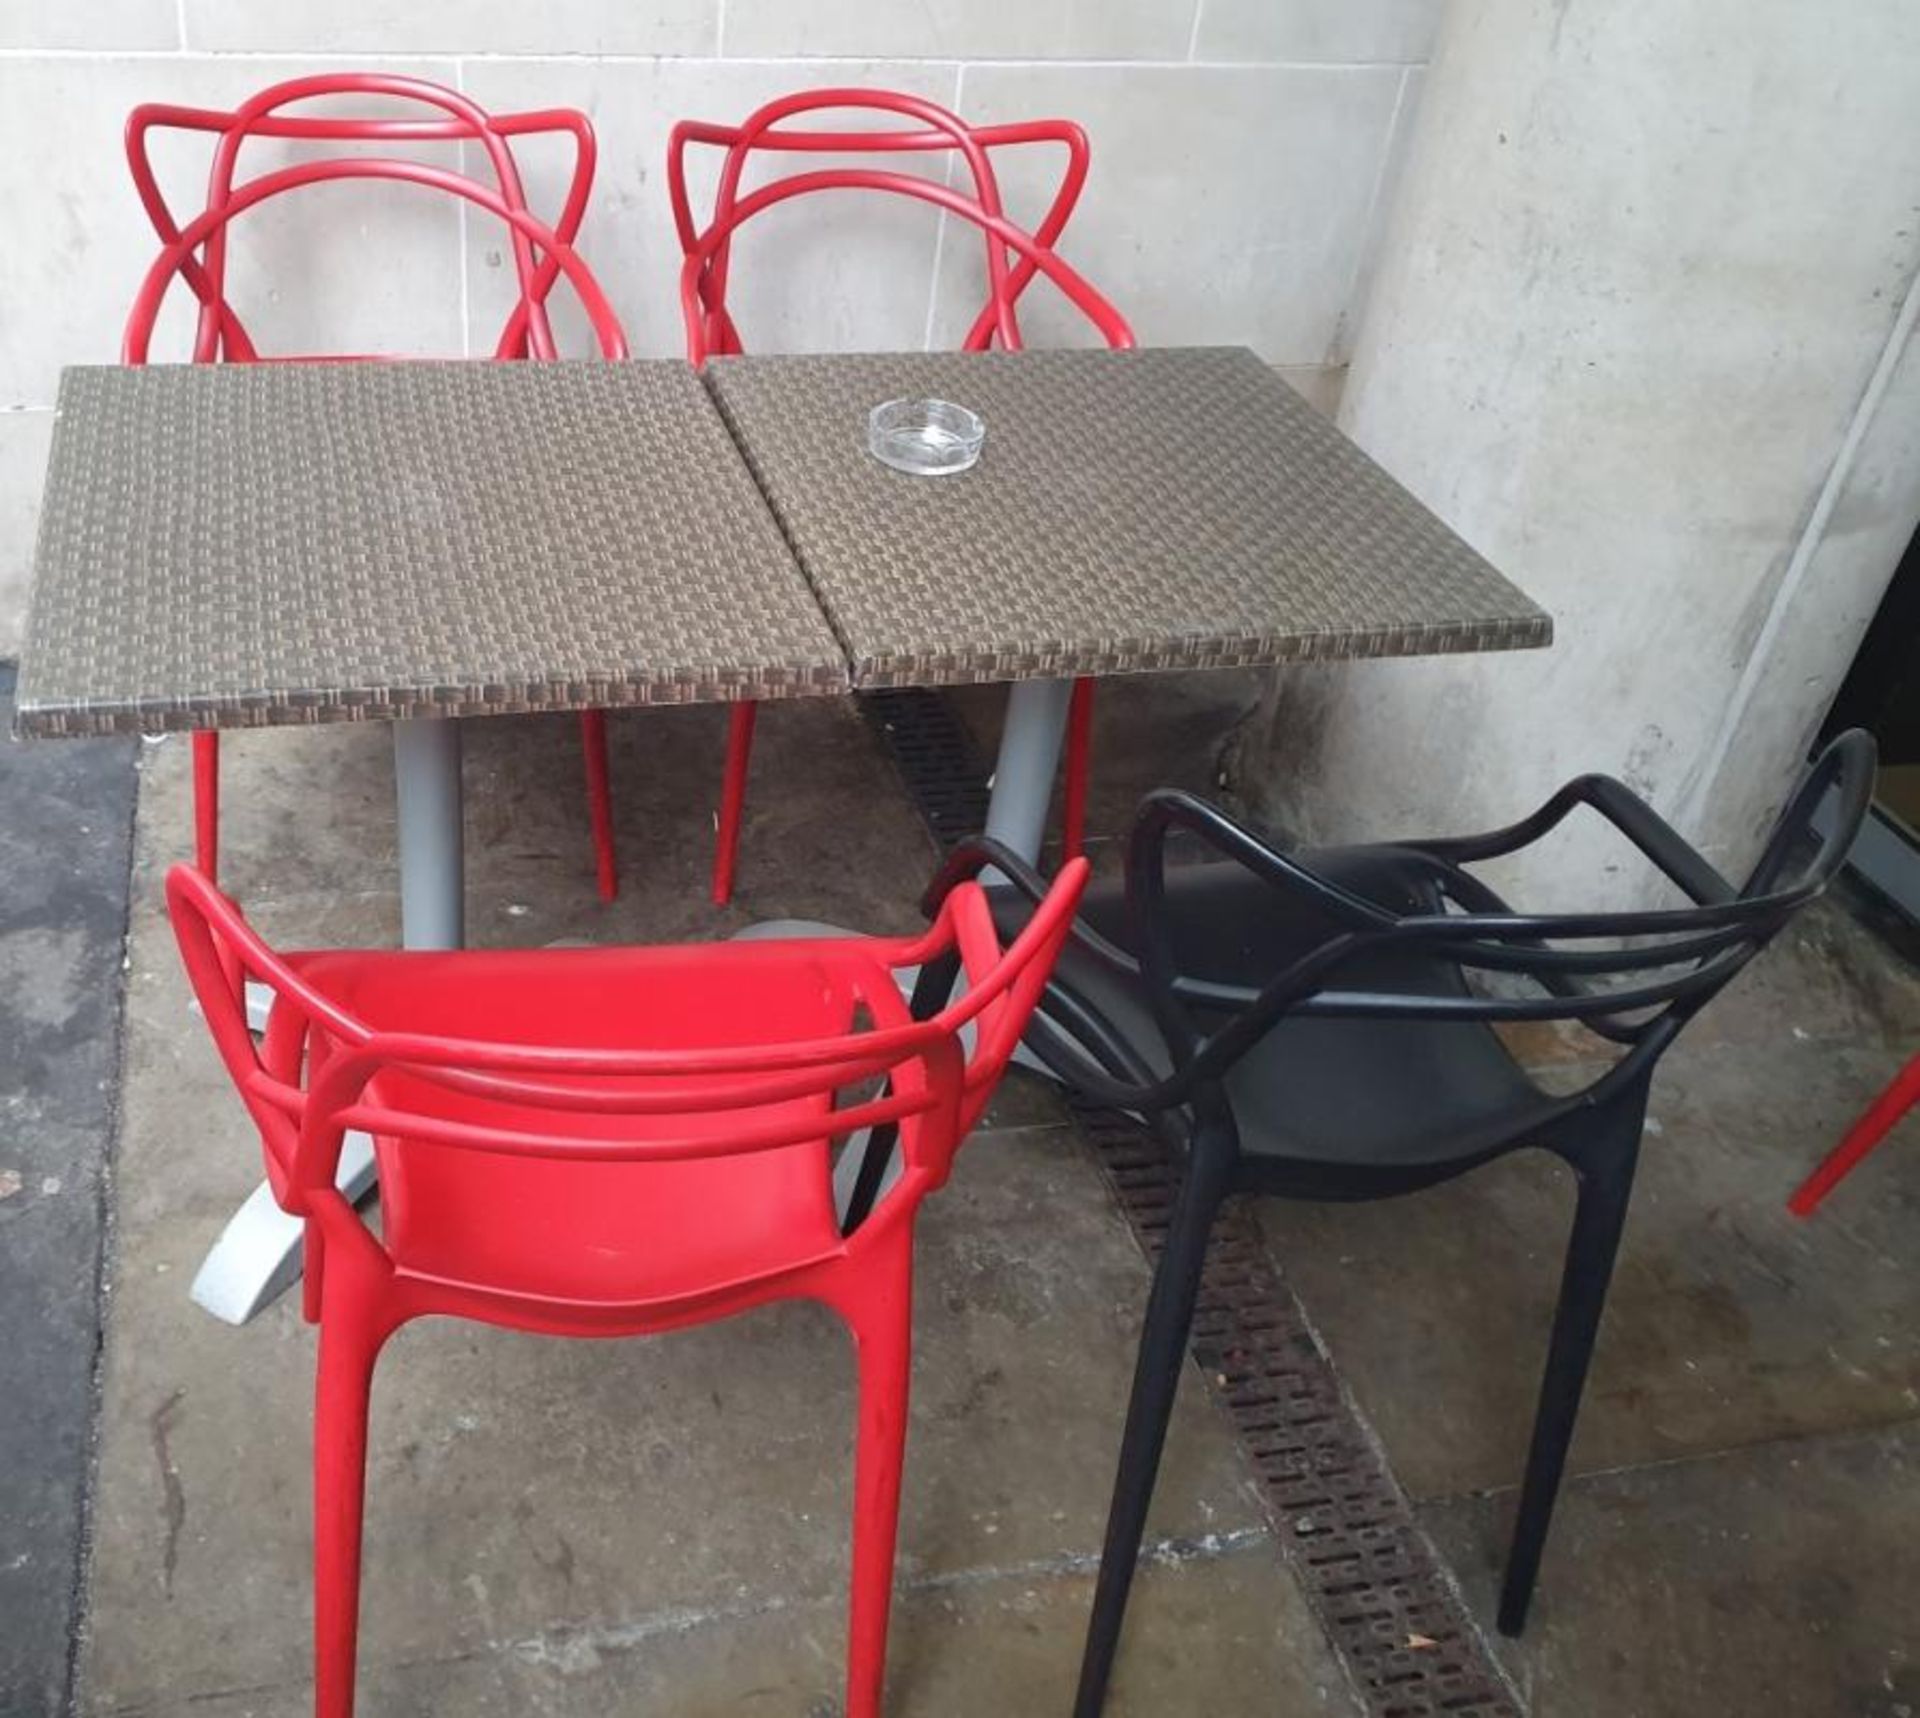 12 x Philippe Starck For Kartell 'Masters' Designer Bistro Chairs - Includes 10 x Red And 2 x Black - Image 3 of 6